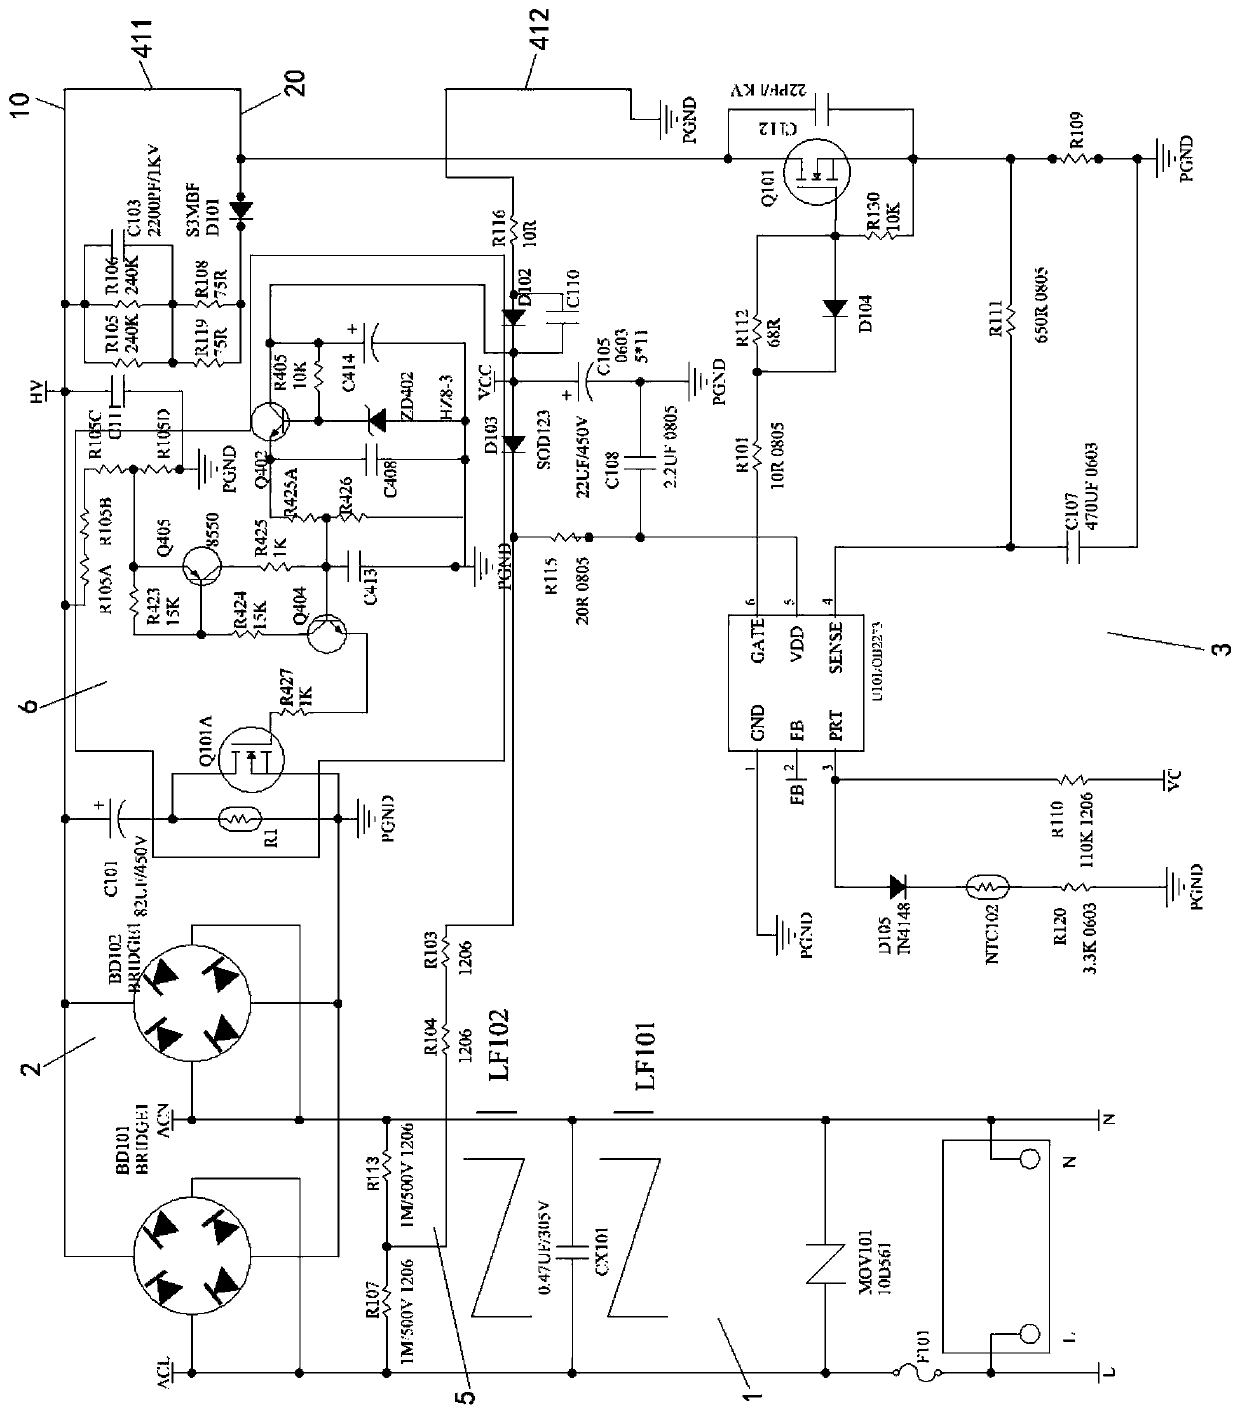 Power supply circuit for suppressing startup instantaneous impulse current